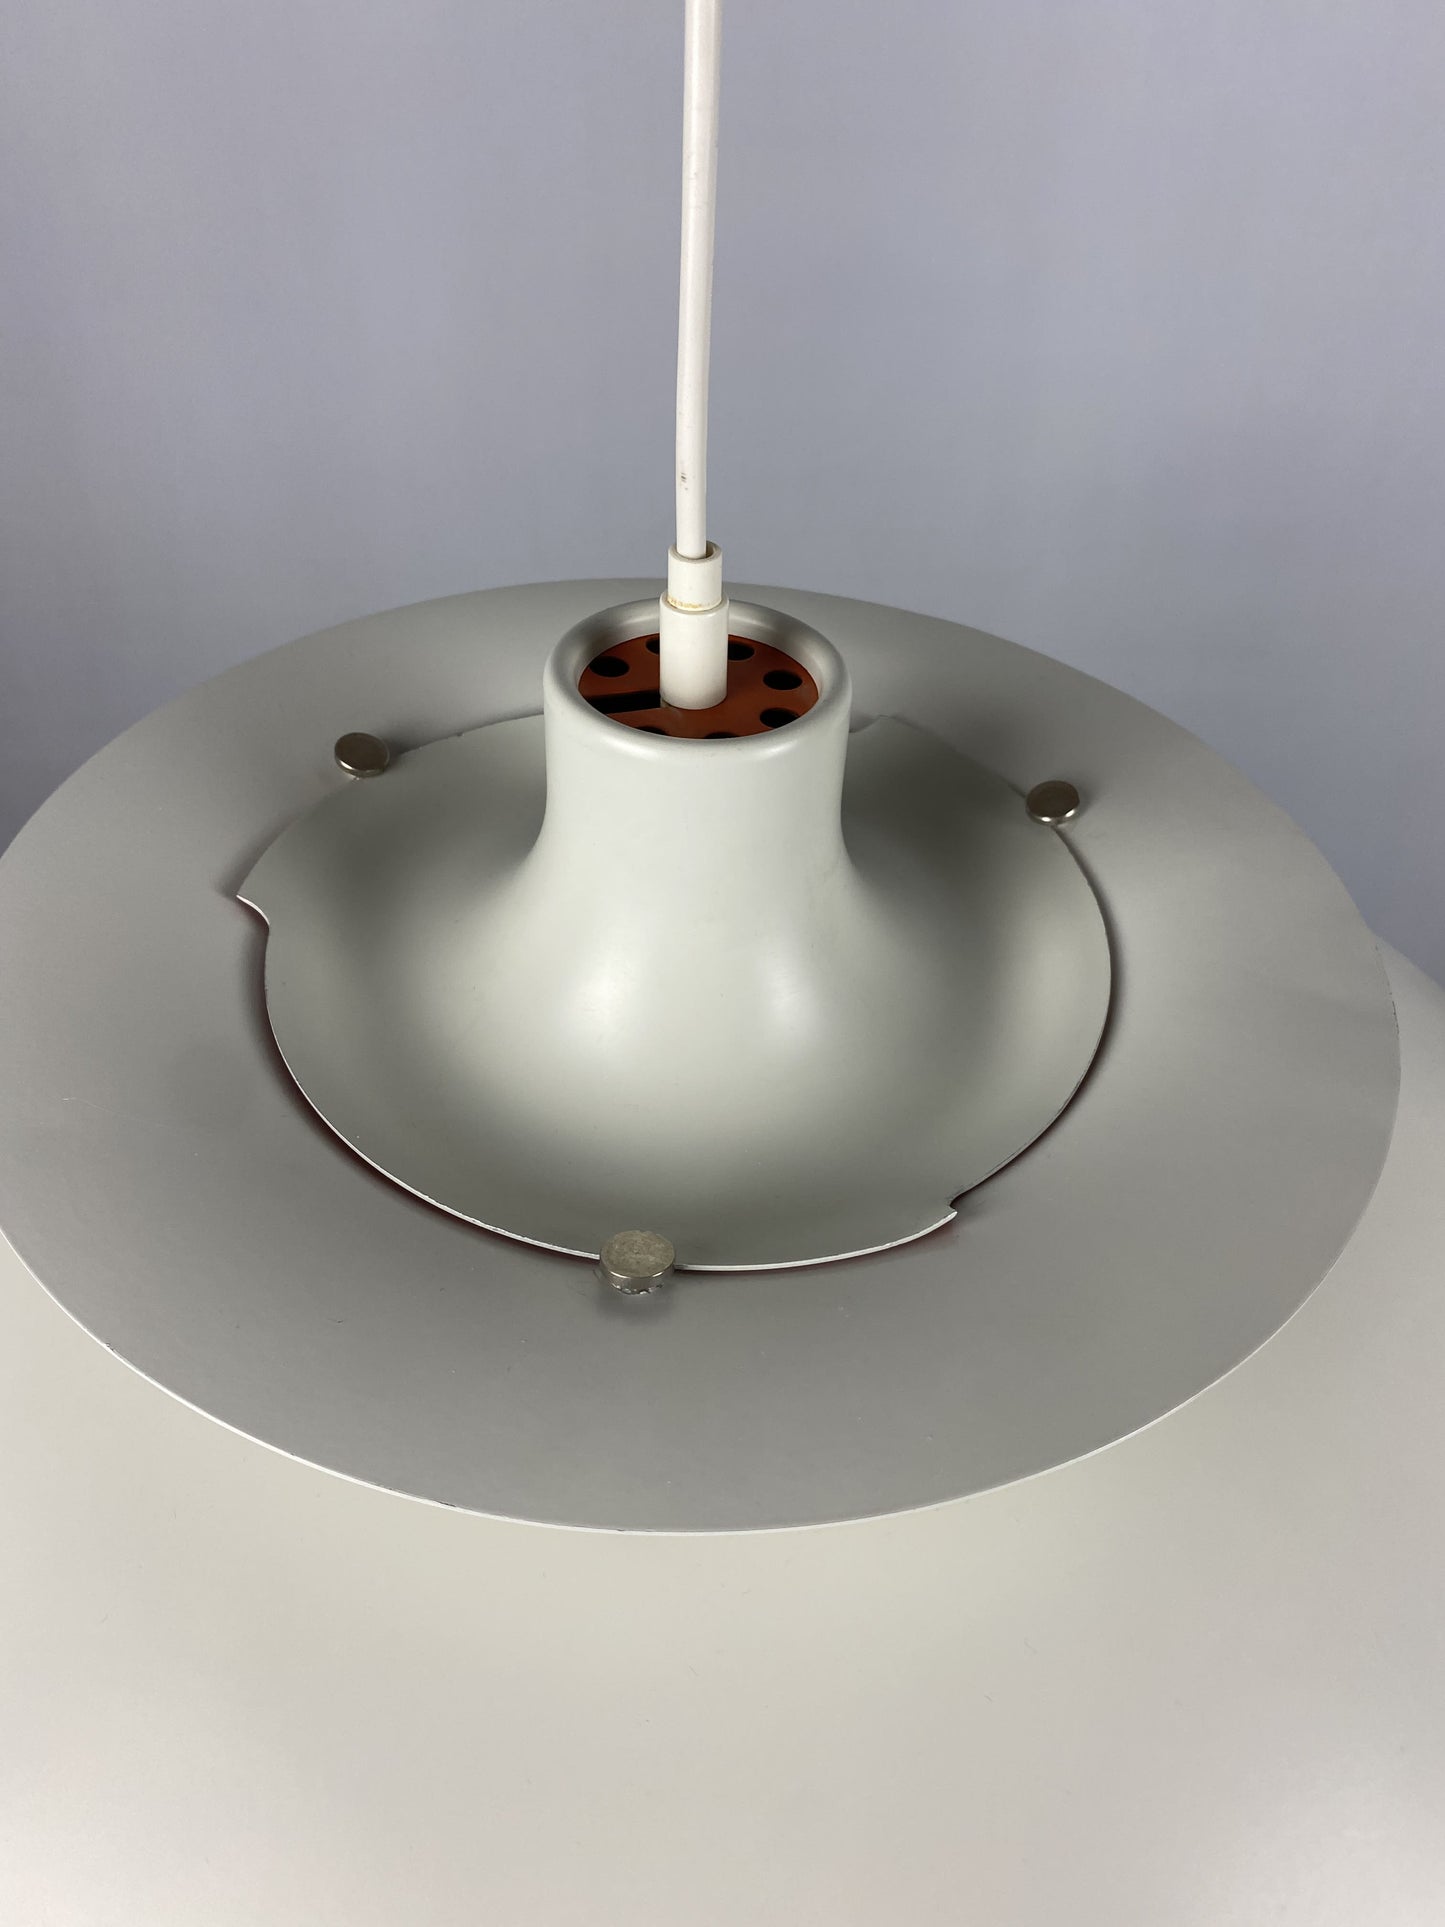 1 of 2 White and purple PH5 pendant light by Poul Henningsen for Louis Poulsen 1970